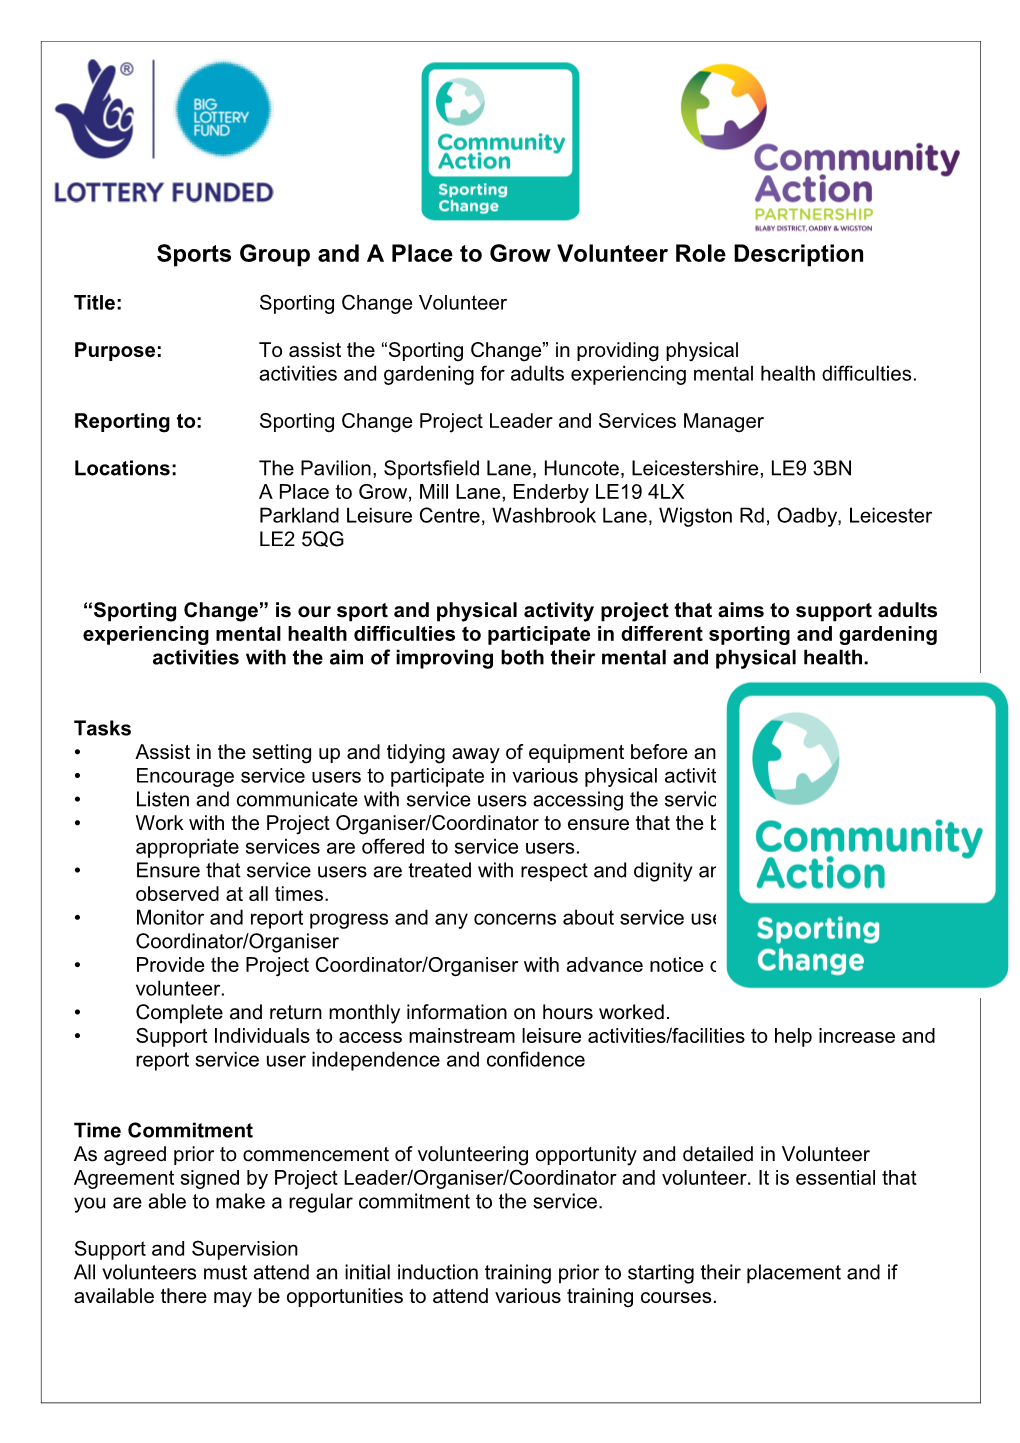 Sports Group and a Place to Grow Volunteer Role Description